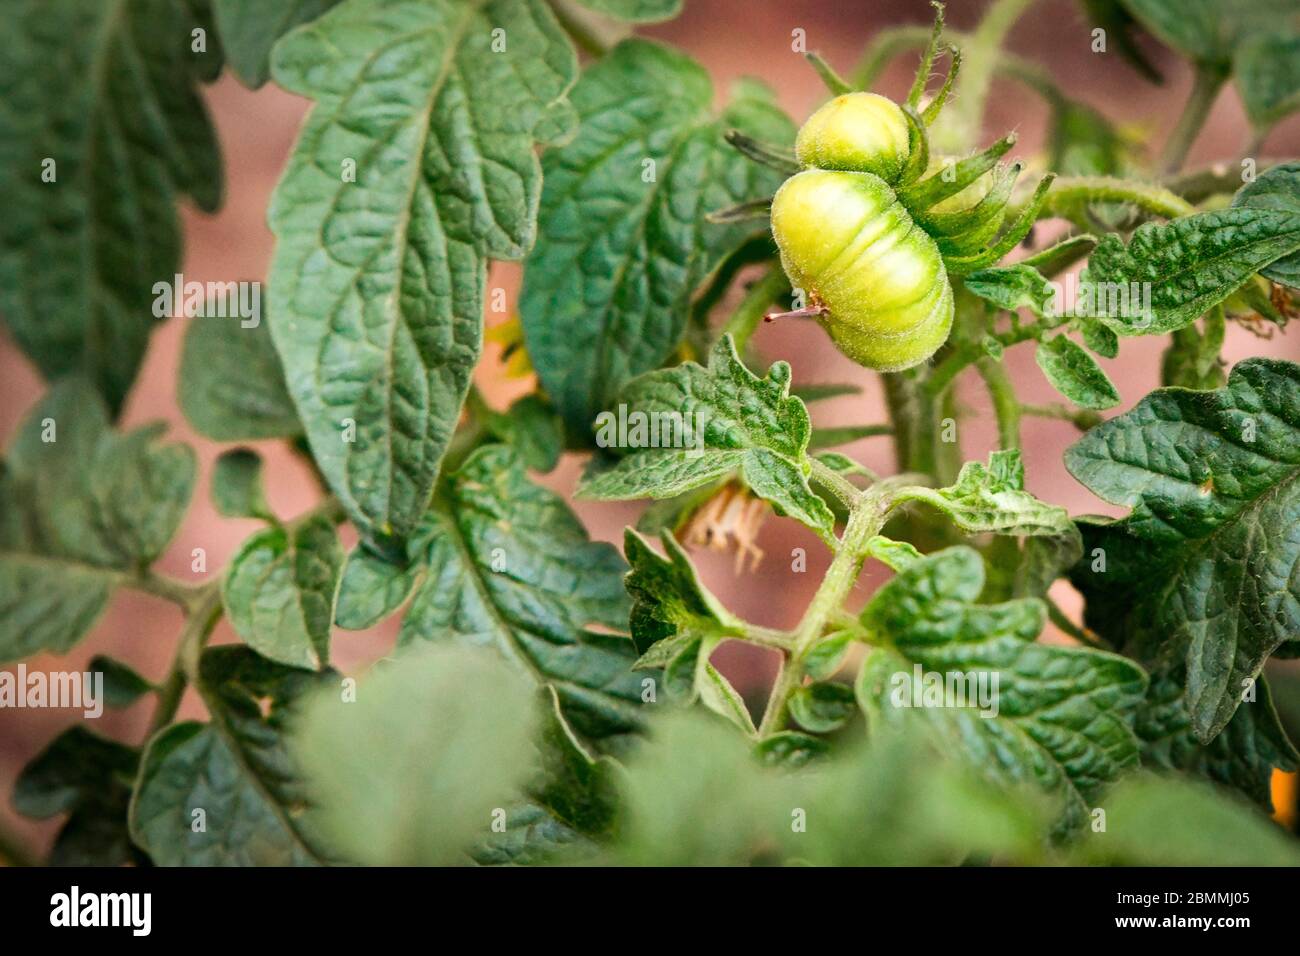 Home Grown Garden Tomato Plant with New Green Tomatoes Growing Stock Photo